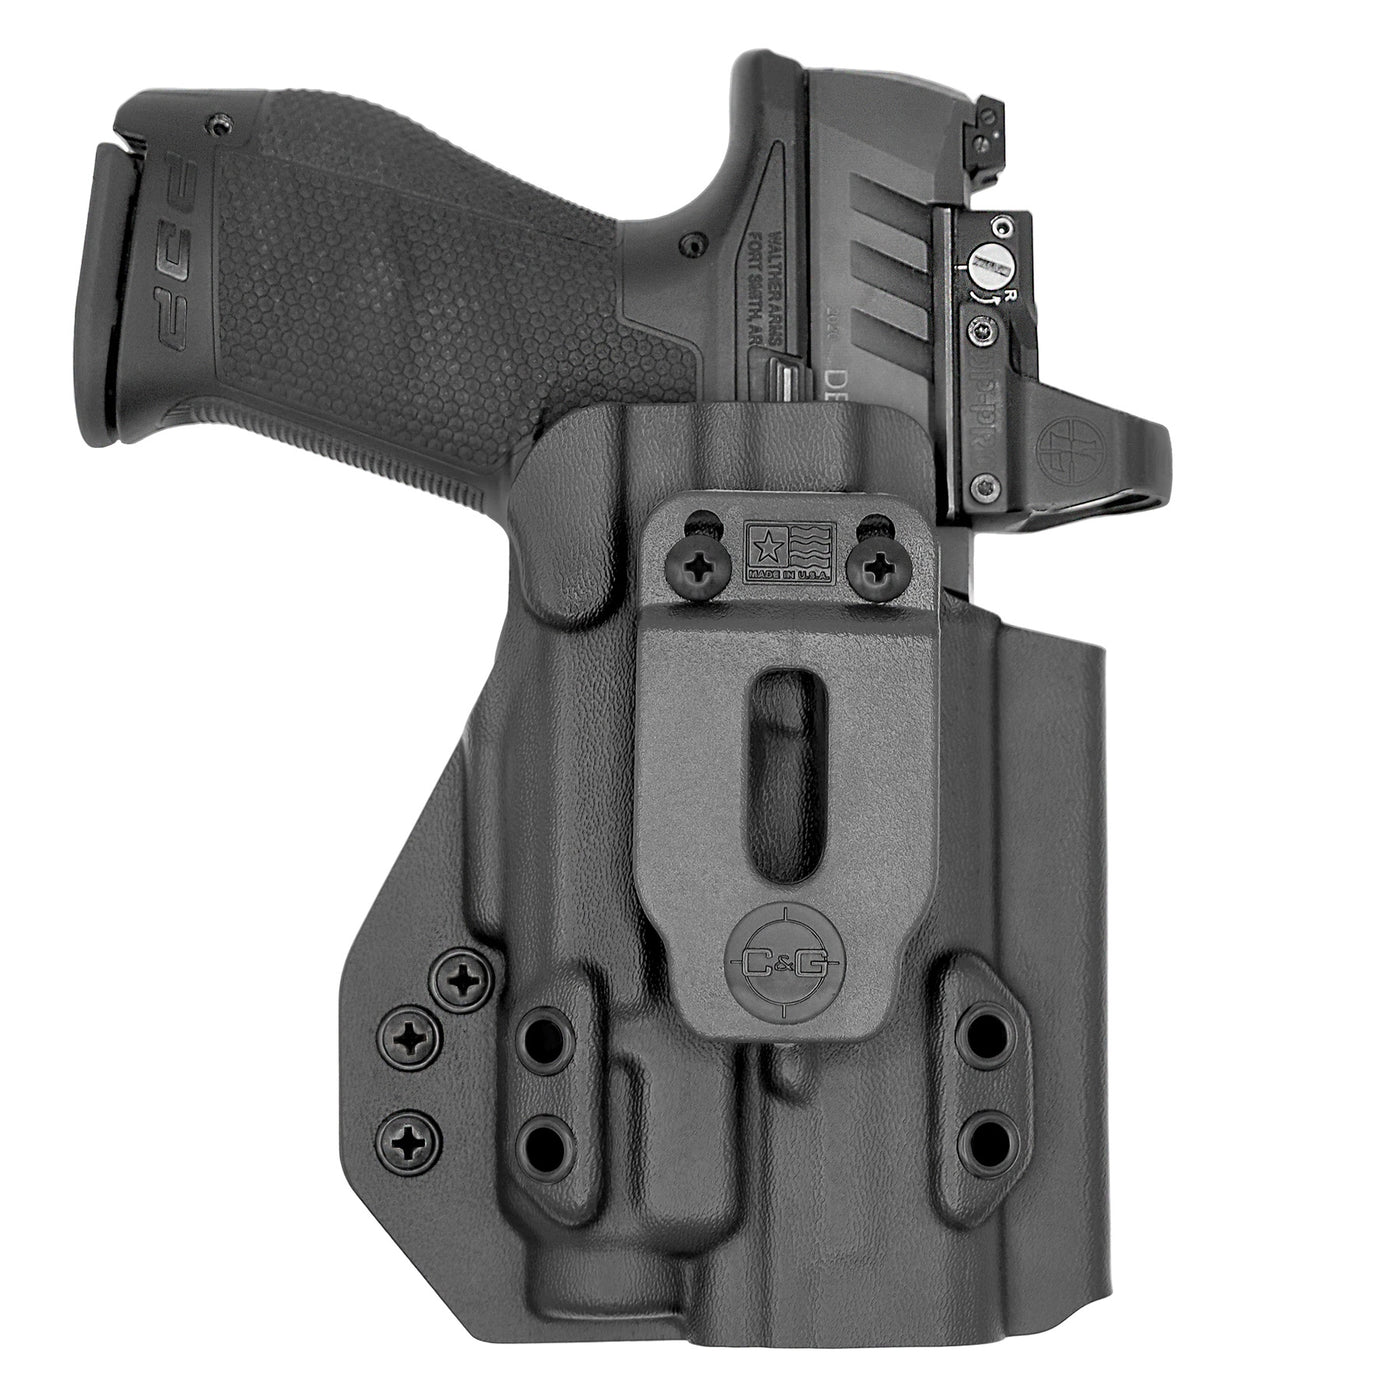 C&G Holsters Quickship IWB Tactical Beretta M9A3 Streamlight TLR7/a in holstered postion